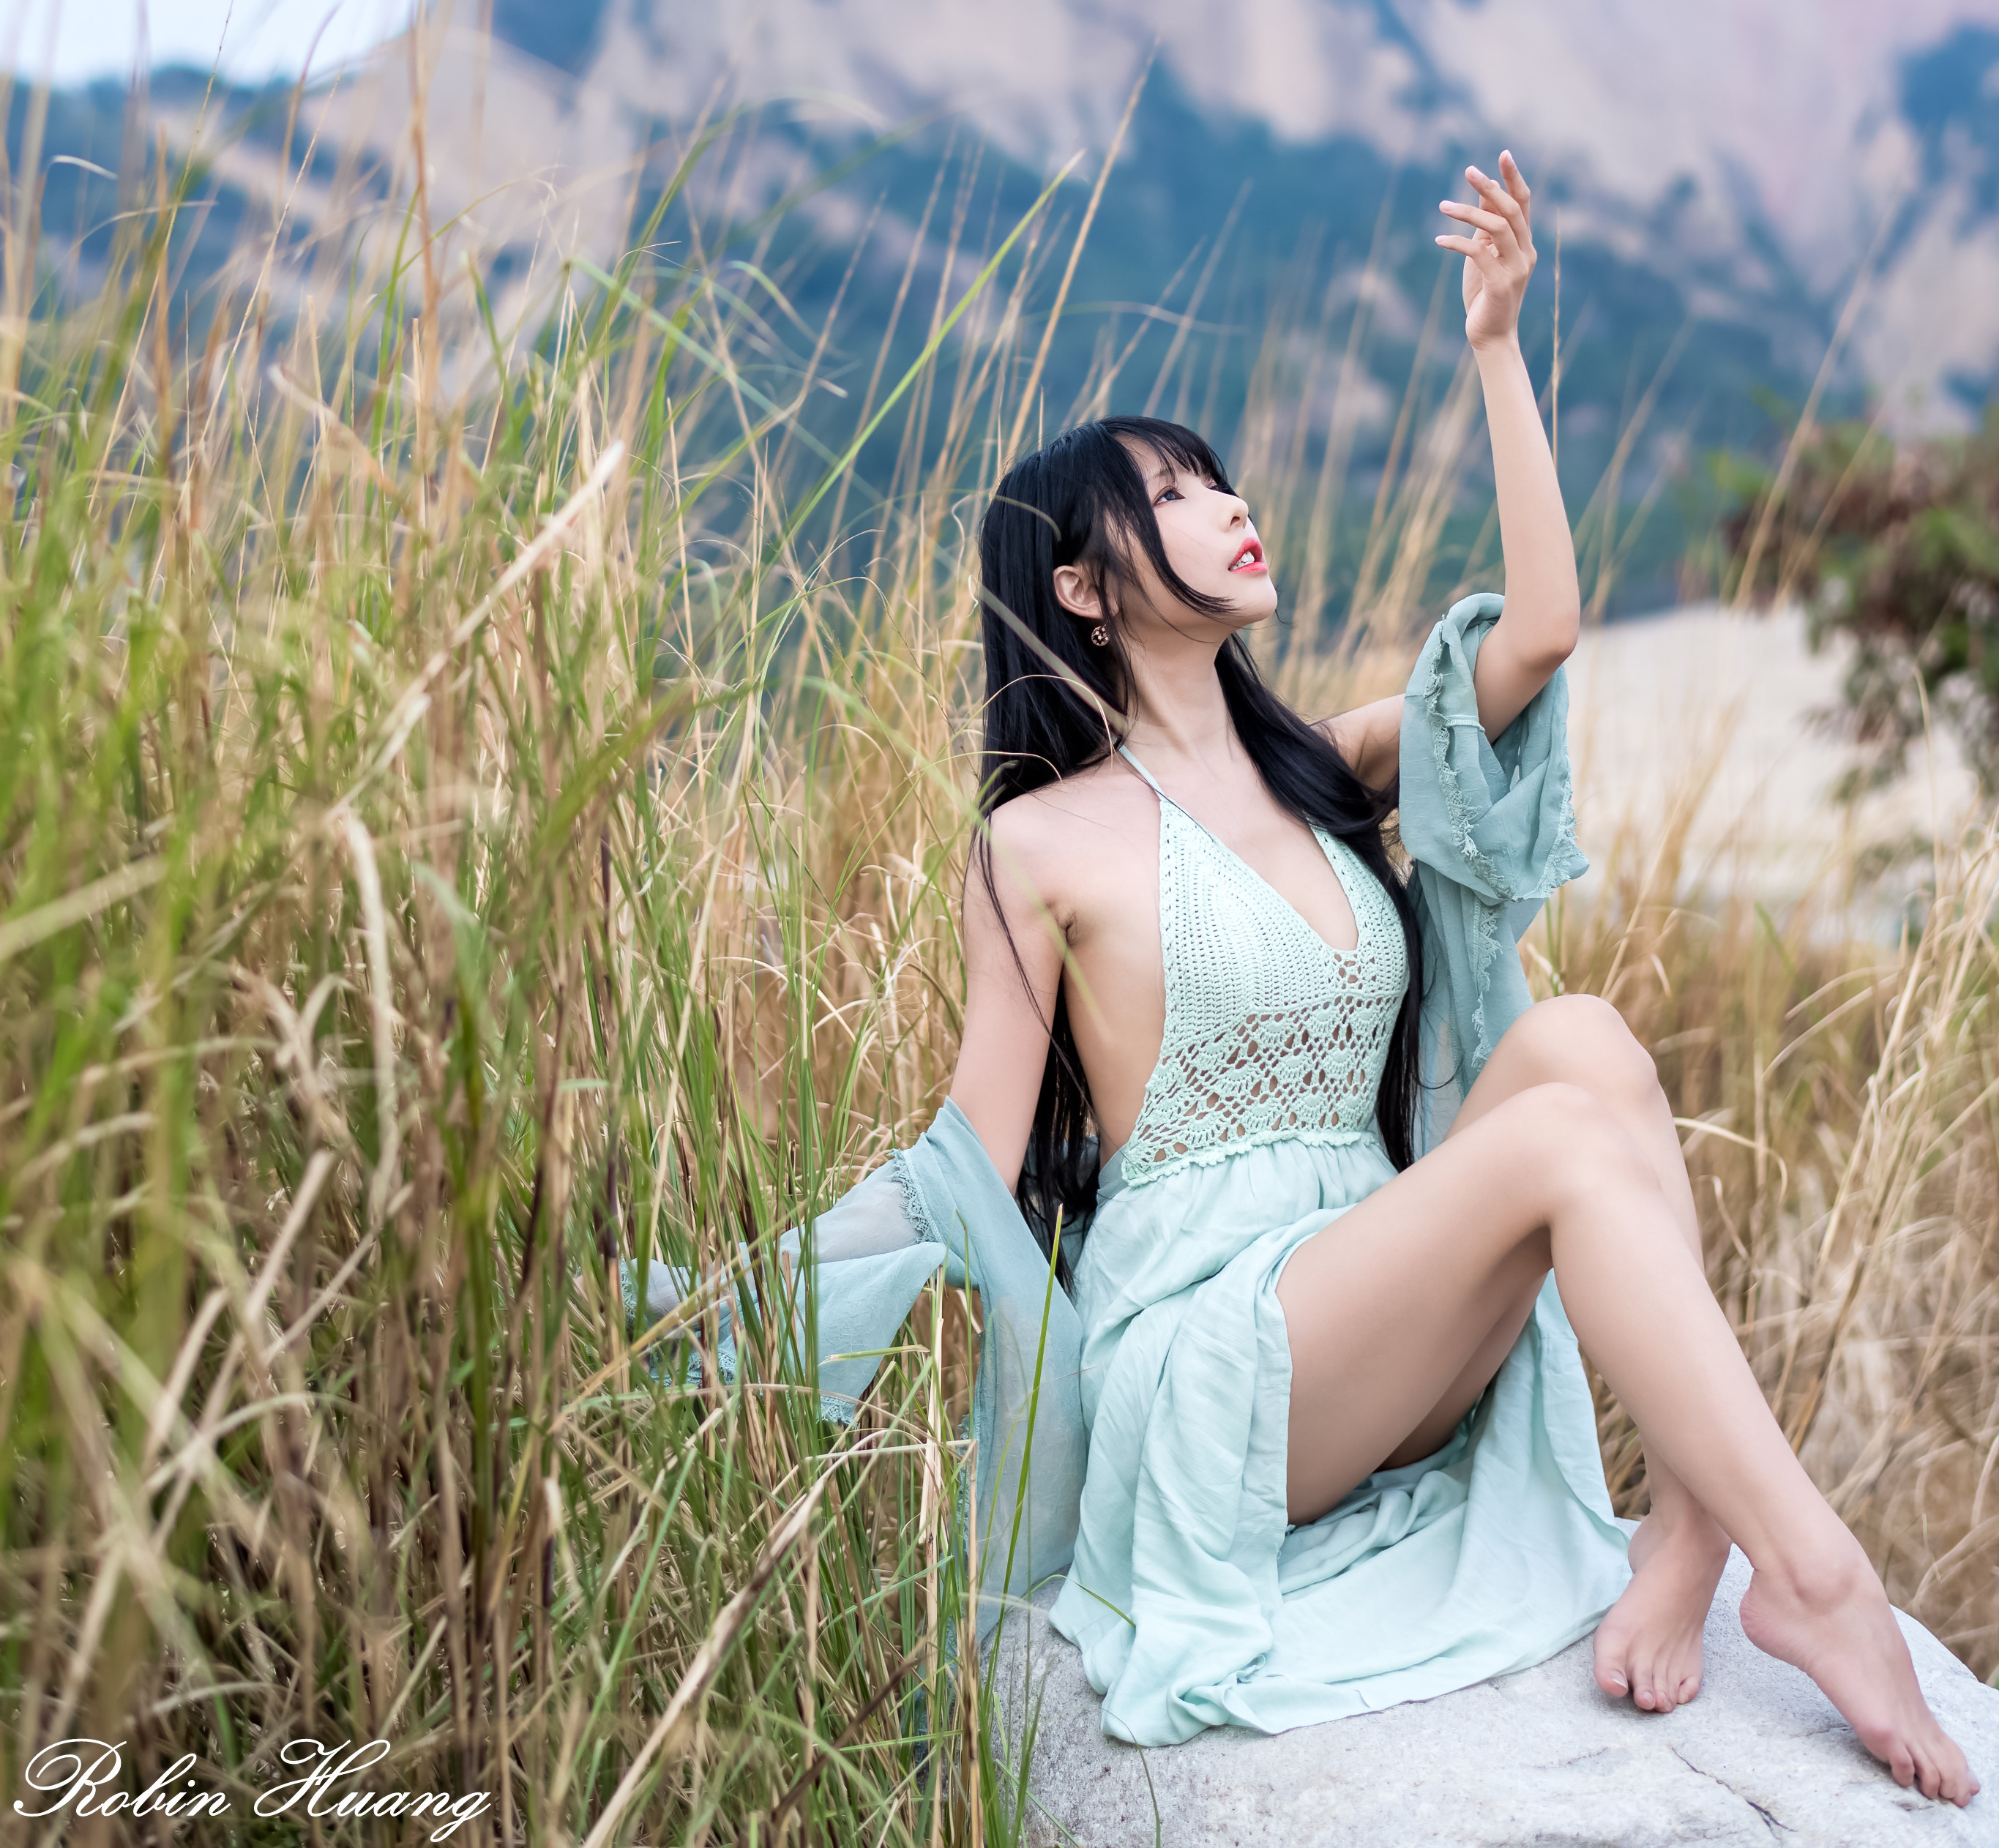 People 2731x2525 Robin Huang women Asian dark hair long hair dress blue clothing nature grass legs barefoot Vicky (Asian model) pointed toes